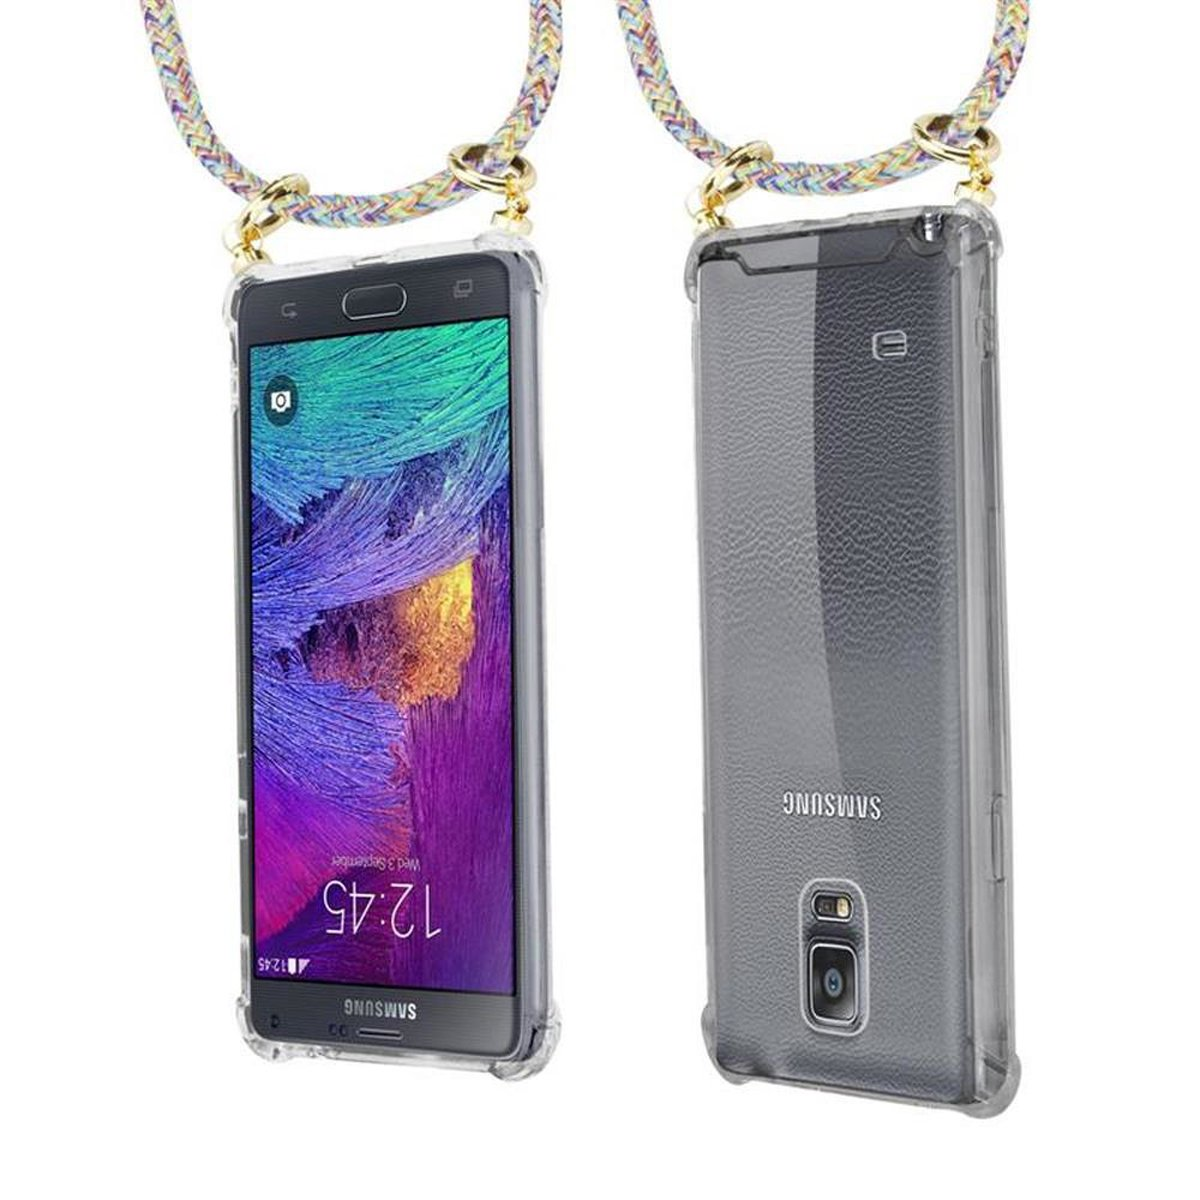 Handy Gold RAINBOW Samsung, und Backcover, Band mit Galaxy NOTE CADORABO 4, Kordel Kette Ringen, abnehmbarer Hülle,